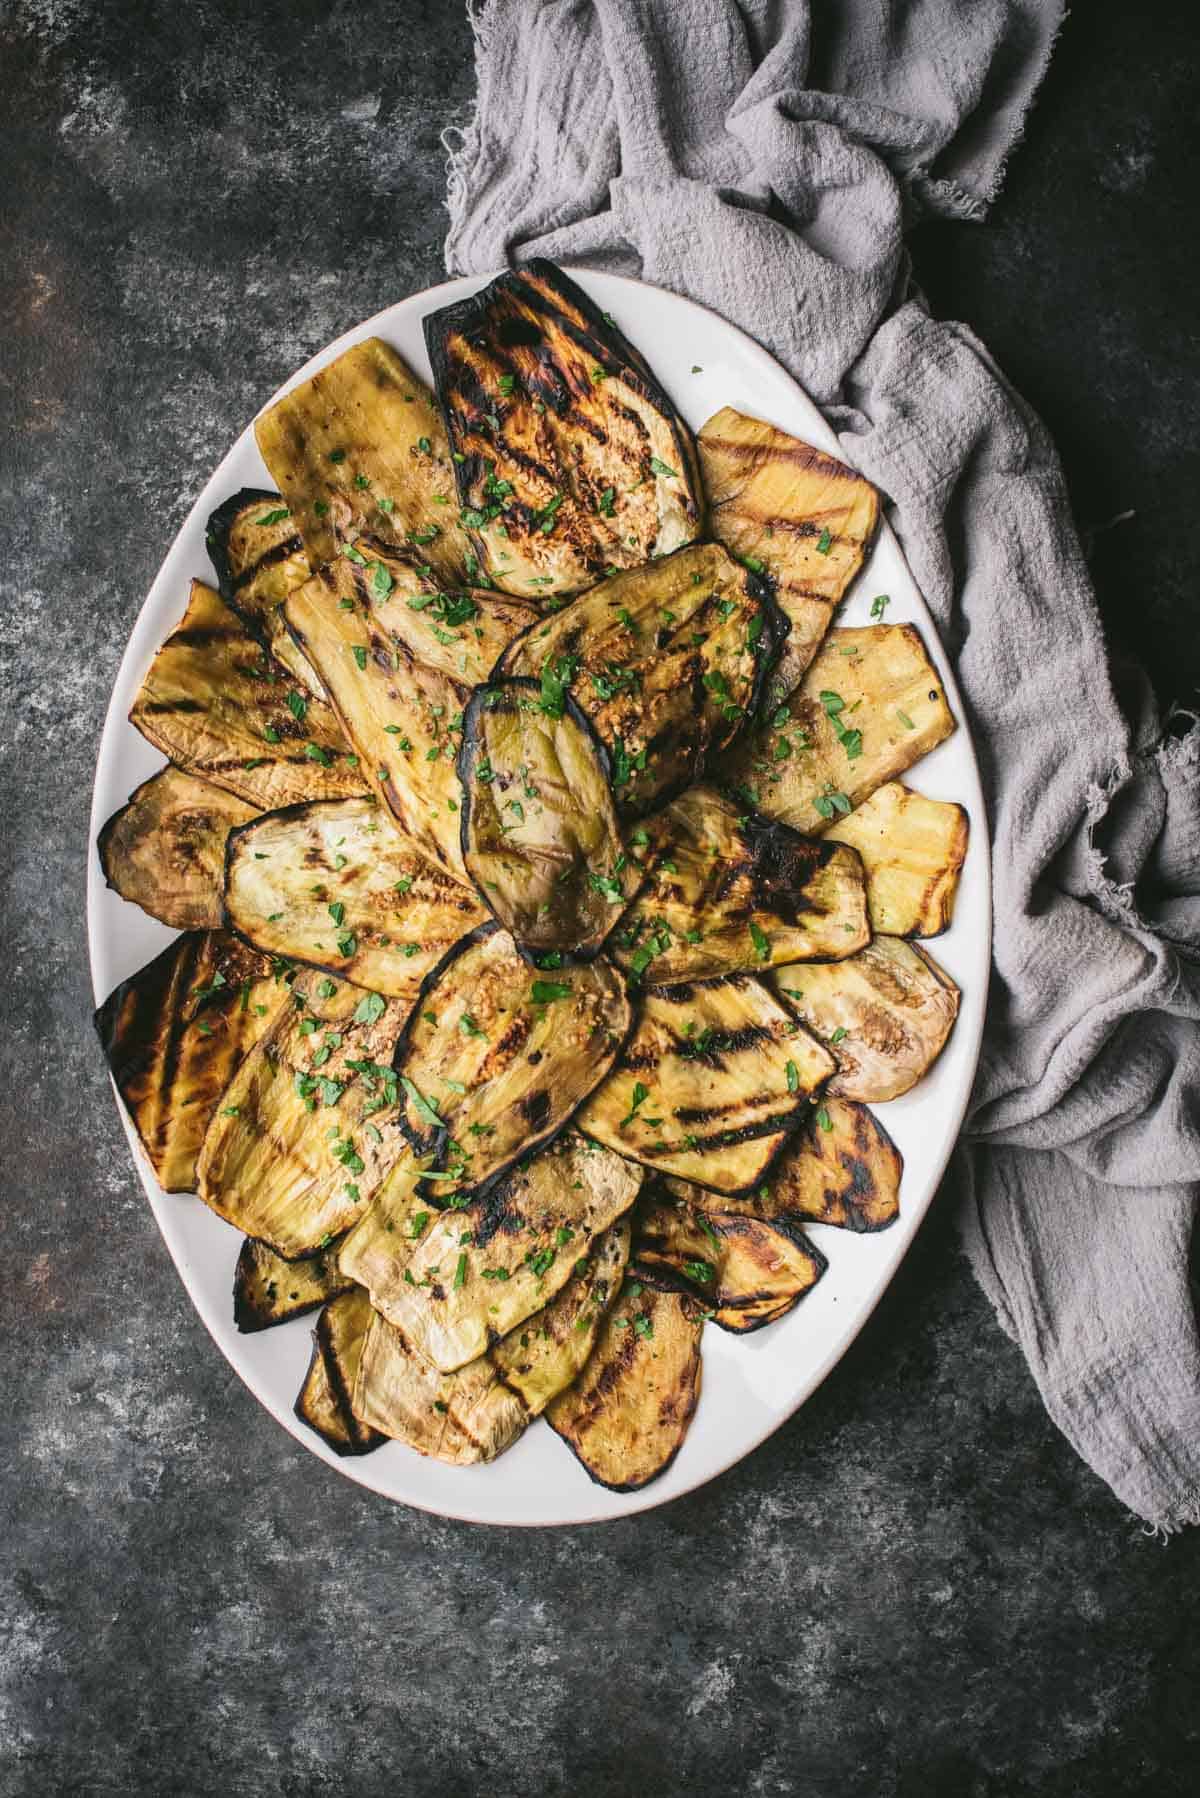 Overhead image of a white platter loaded with perfectly charred grilled eggplant and garnished with herbs with a gray linen napkin beside it.